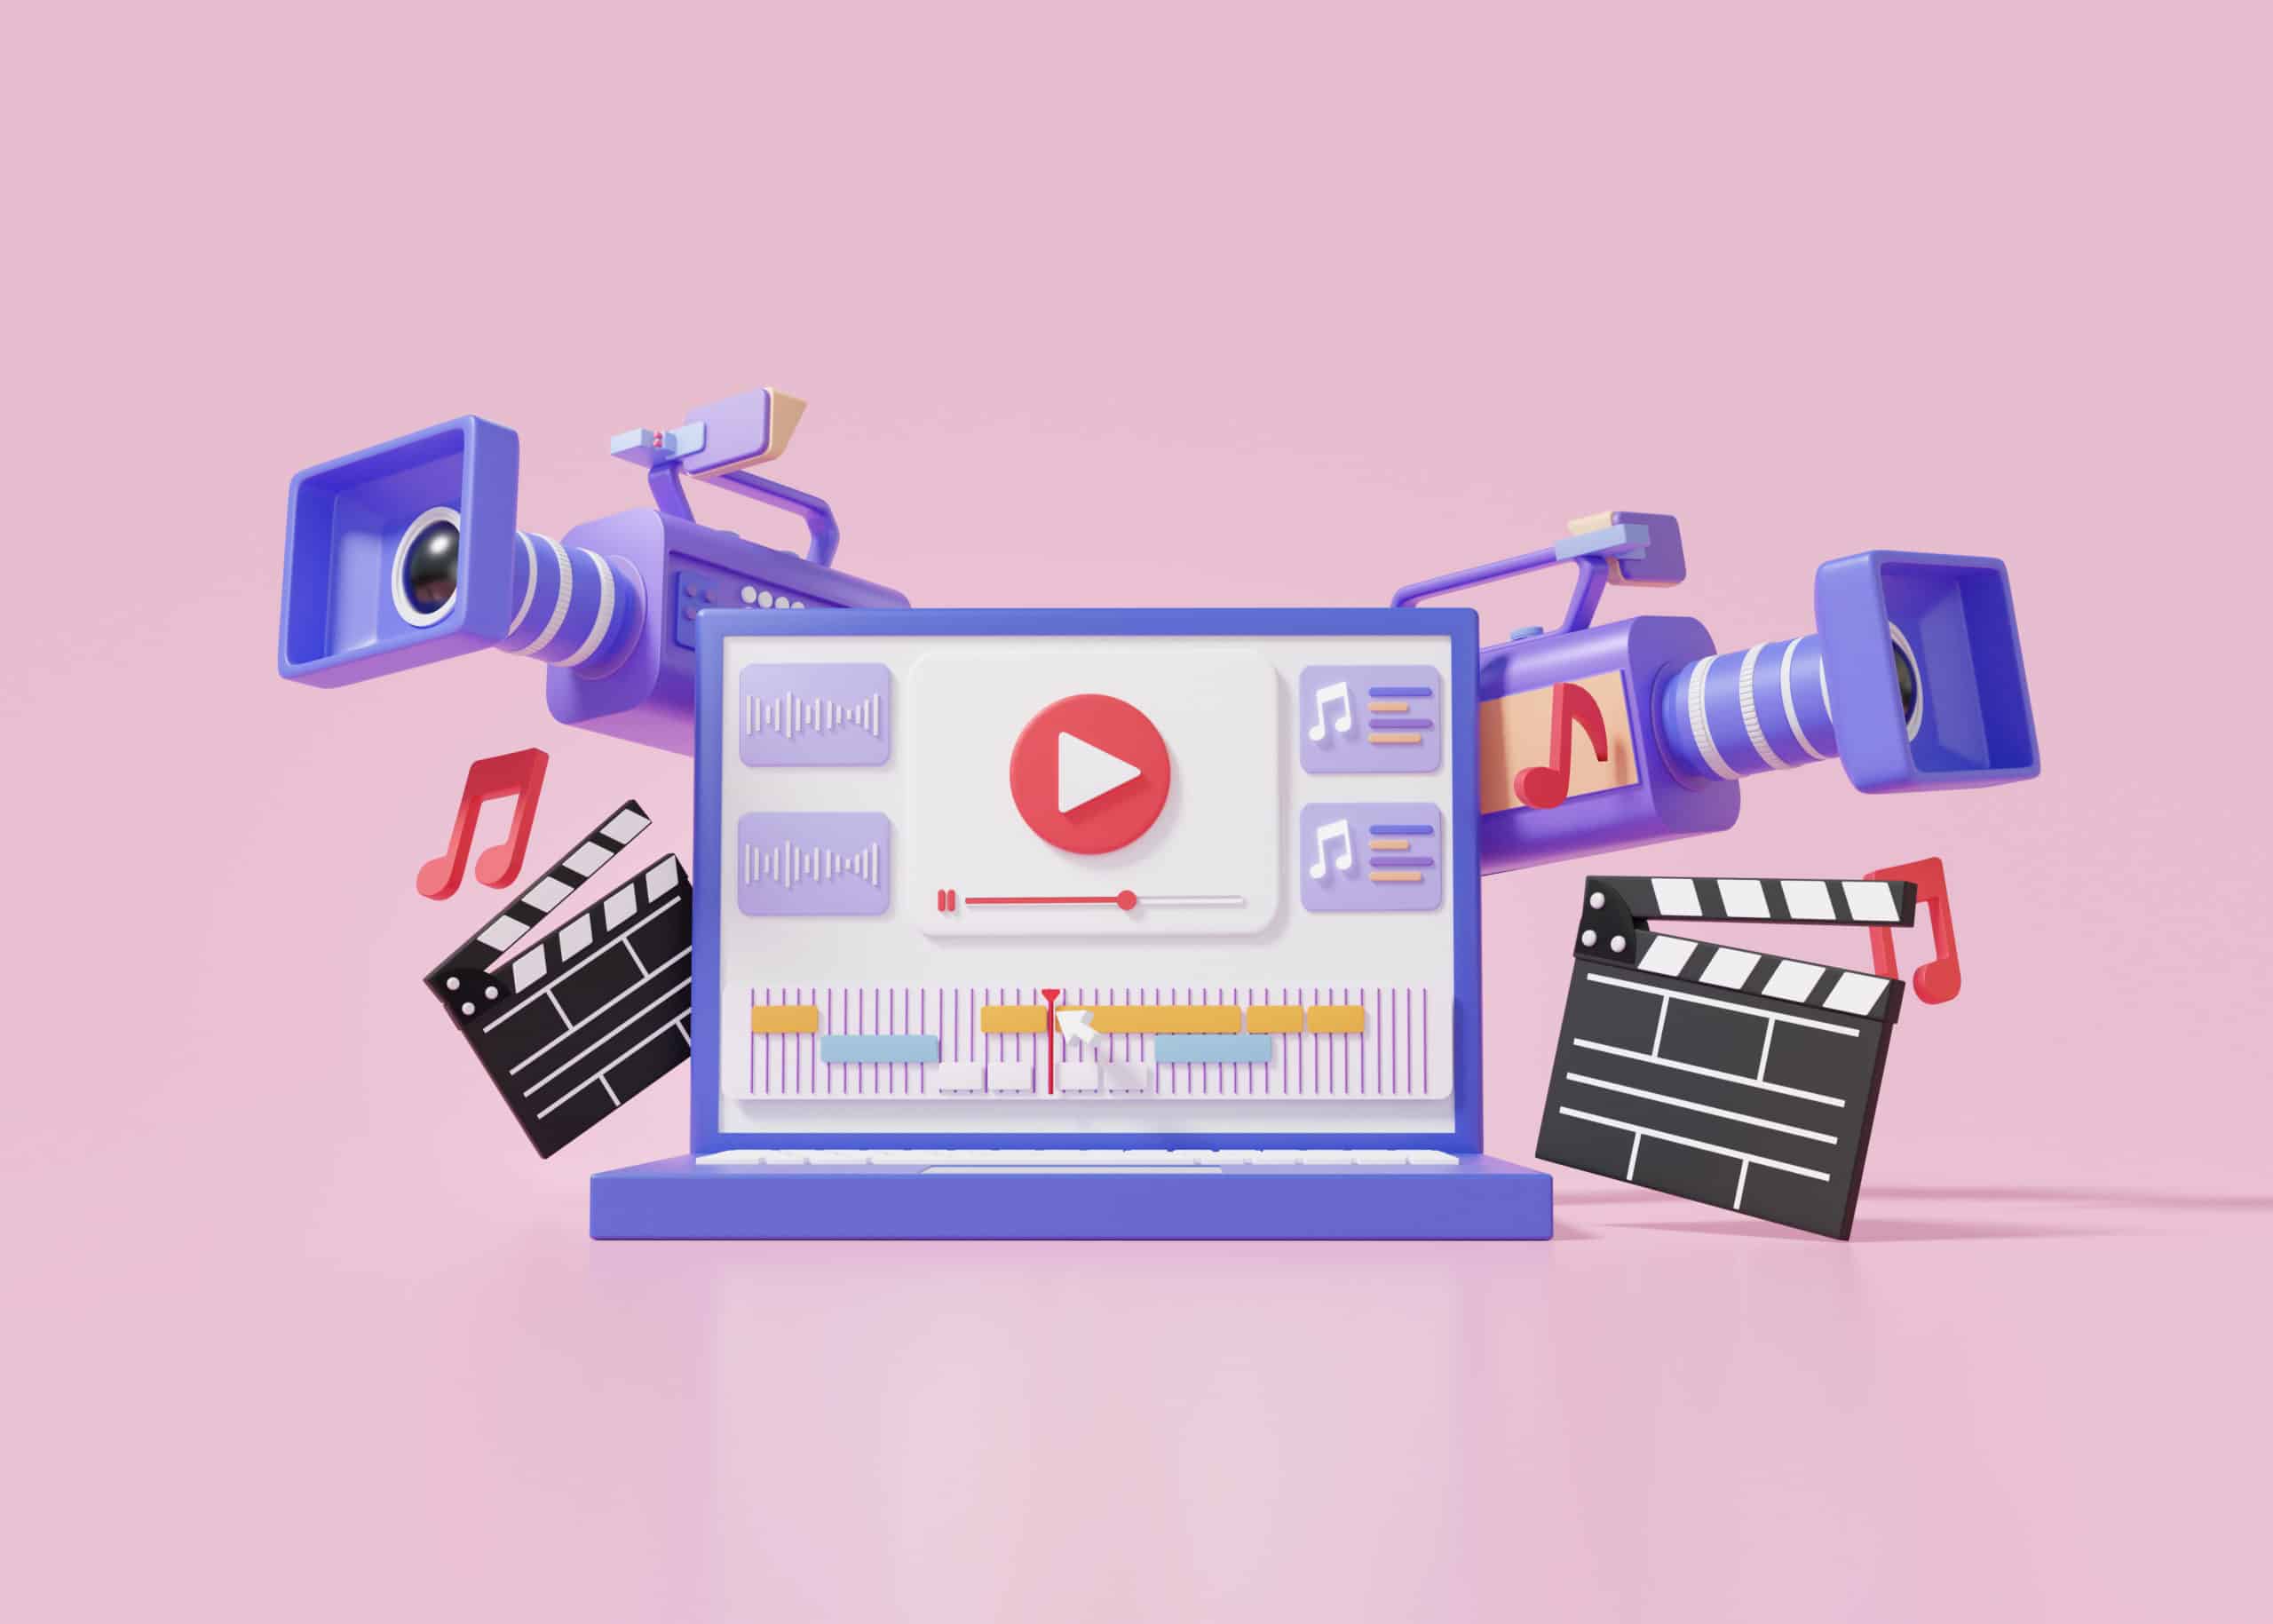 laptop-mockup-movie-camera-video-editing-cuts-footage-sound-music-via-computer-cartoon-cute-smooth-pink-background-motion-vlog-movie-clapper-board-3d-render-illustration